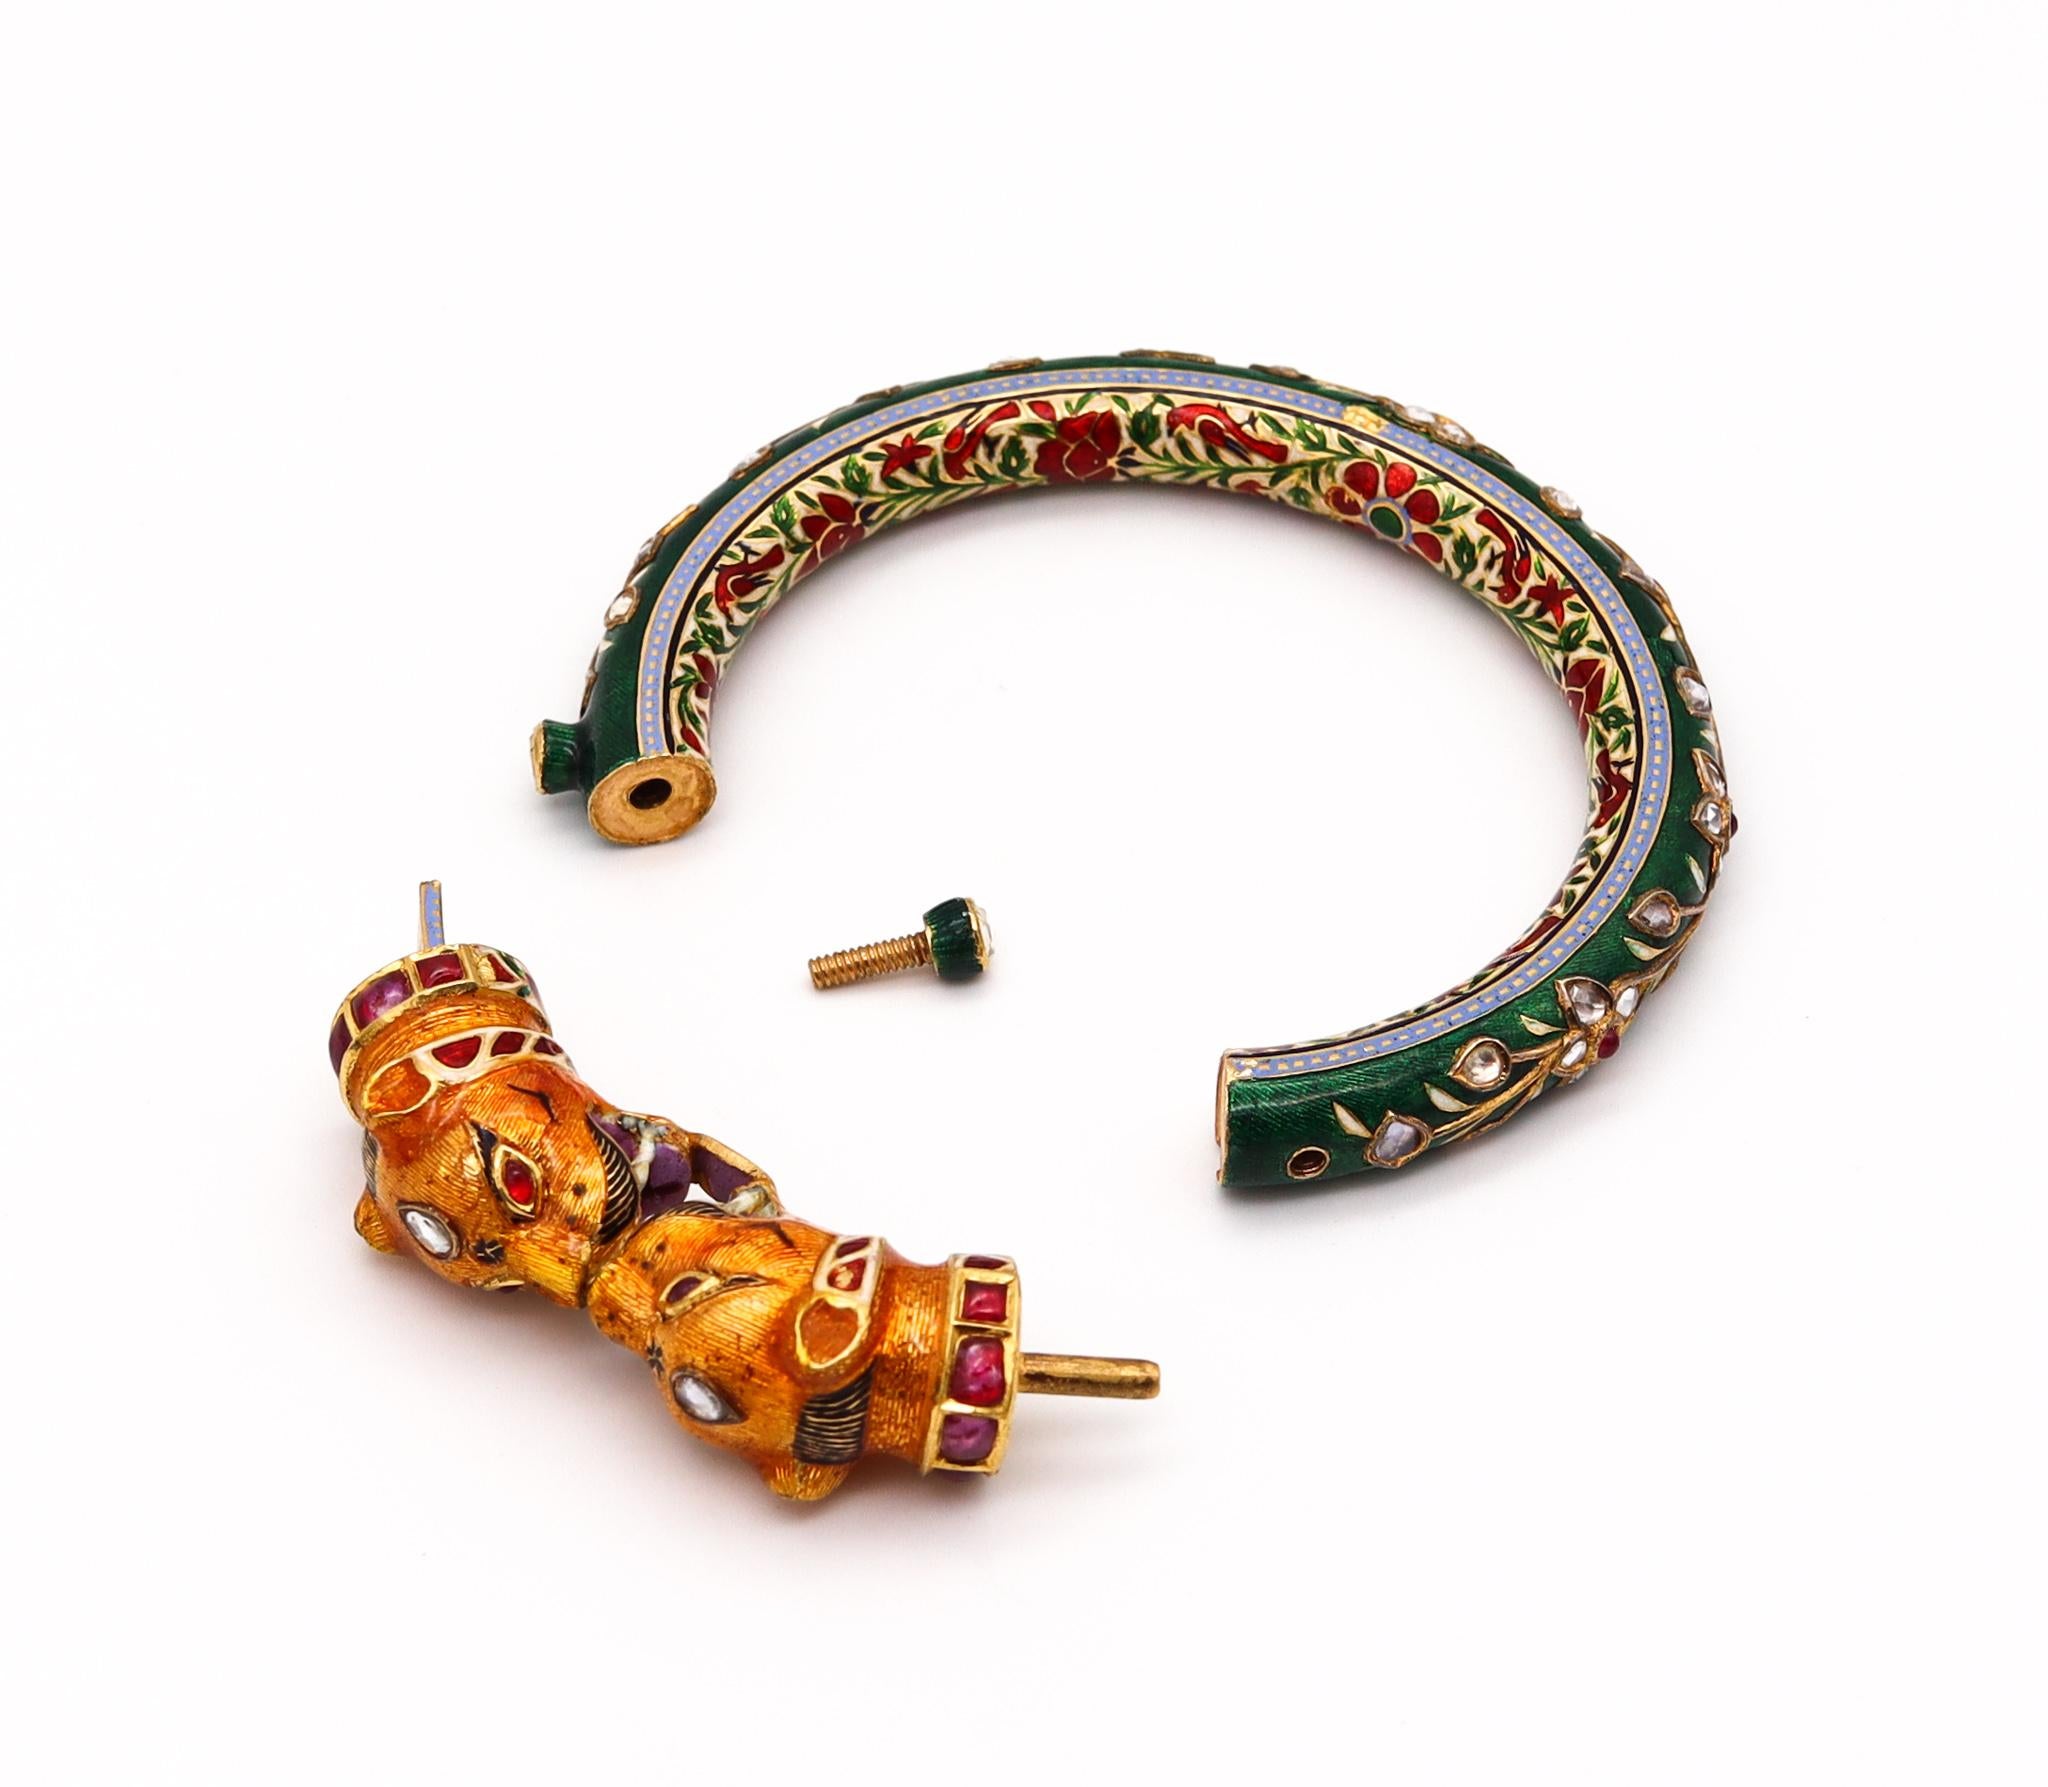 Mixed Cut Mughal Empire Vintage Enameled Bracelet 22Kt Gold 8.93 Ctw in Diamonds & Rubies For Sale